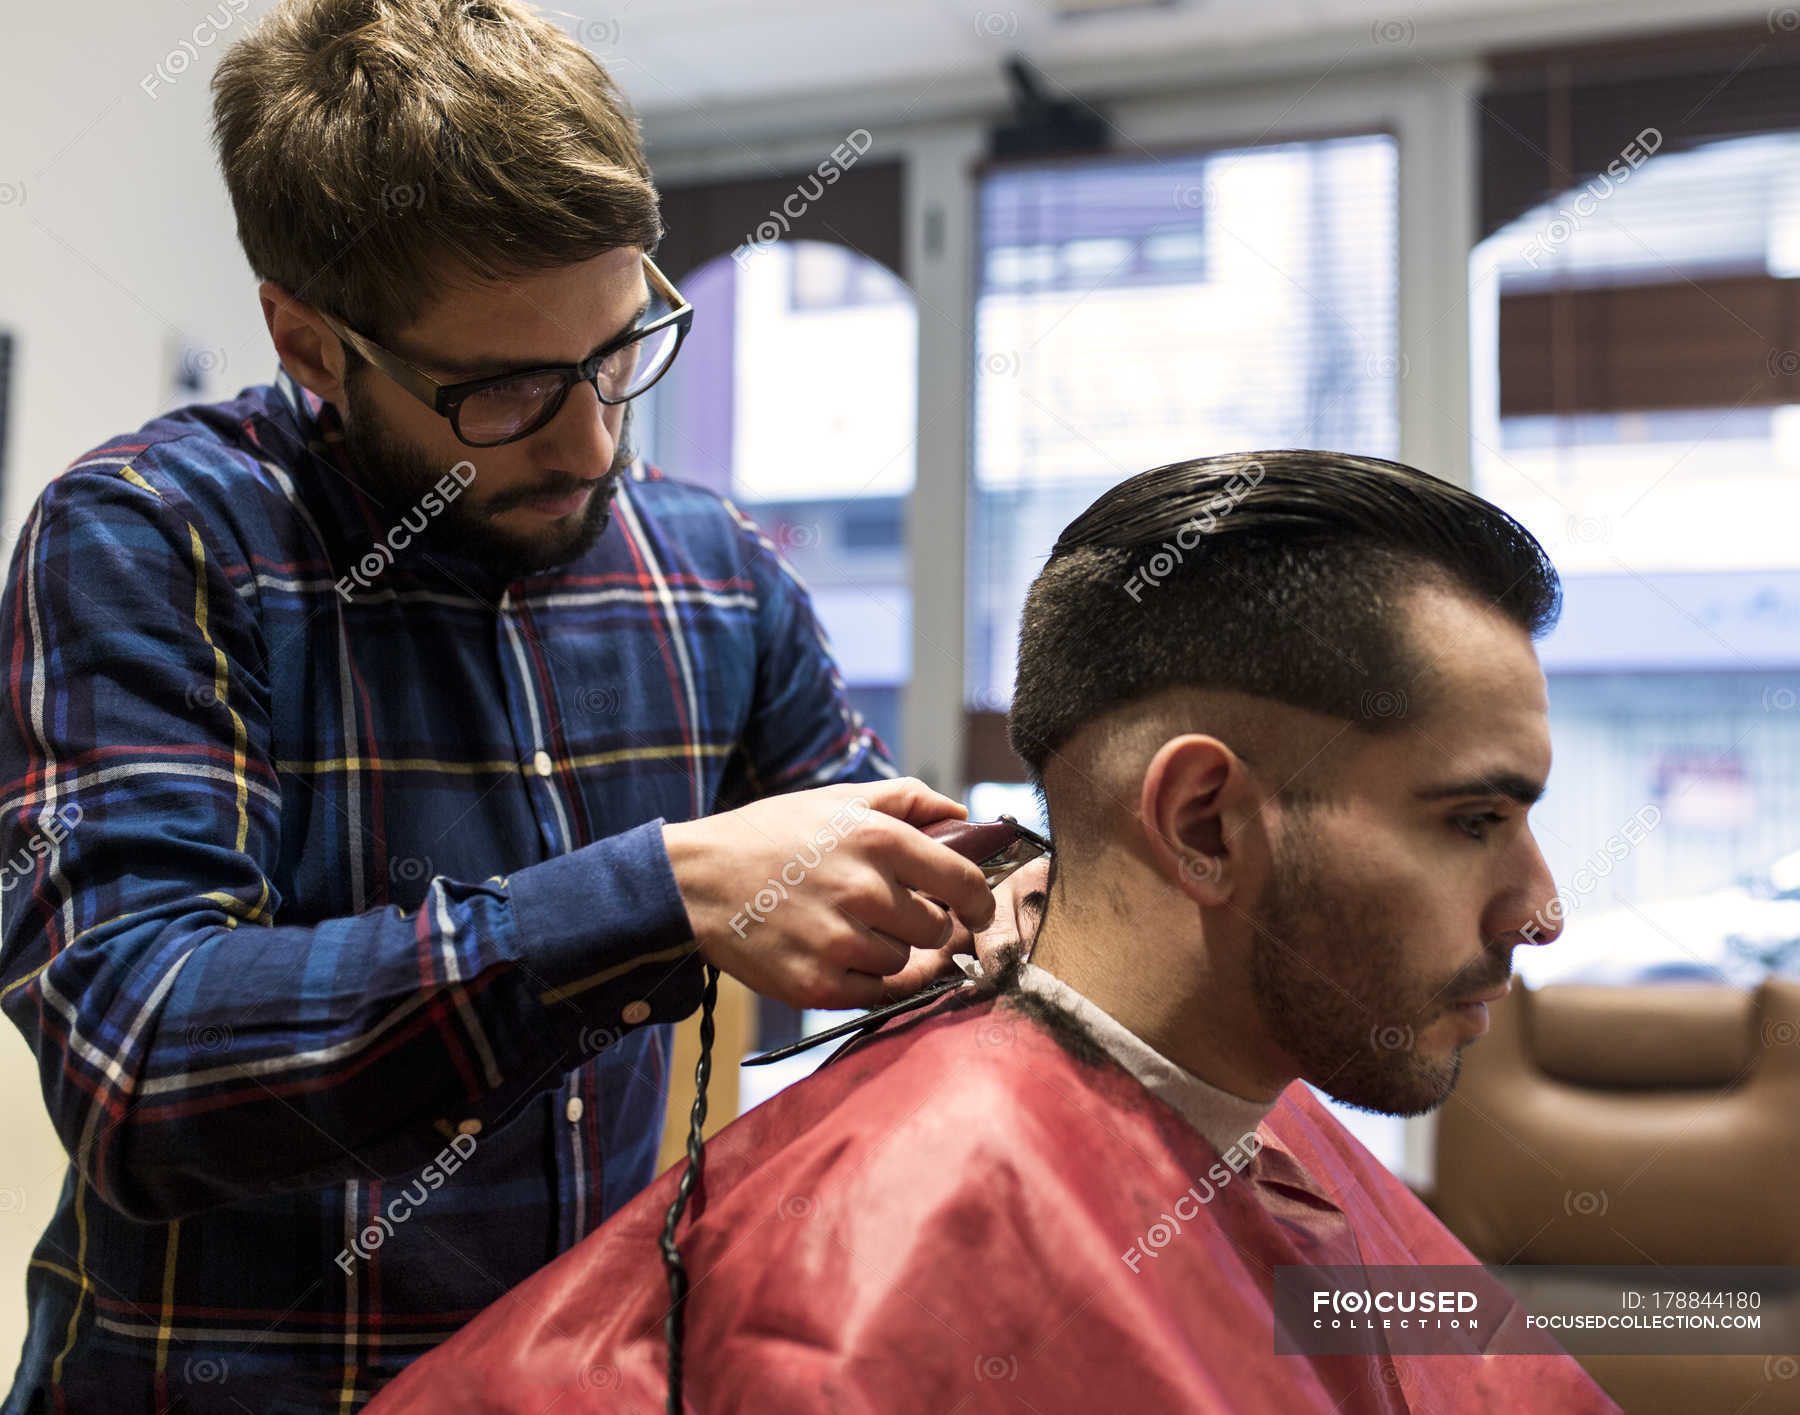 Hairdresser shaving young man's hair in a barbershop — 25 30 Years,  occupation - Stock Photo | #178844180